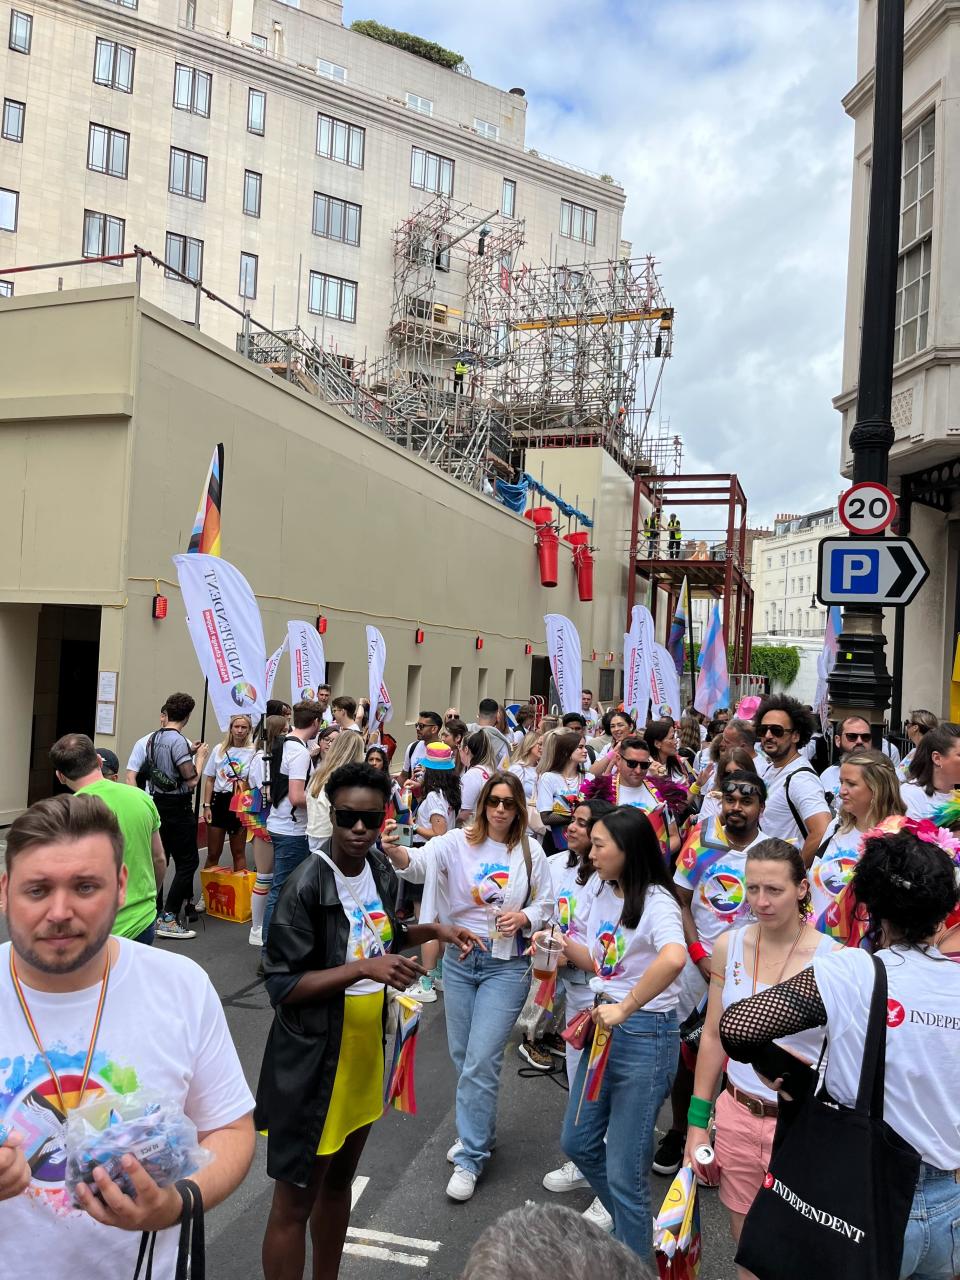 The Independent are ready for the Pride in London parade, with members of the newsroom, including editor-in-chief Geordie Greig, all gathered in the central London crowds. (Alastair Jamieson / The Independent)